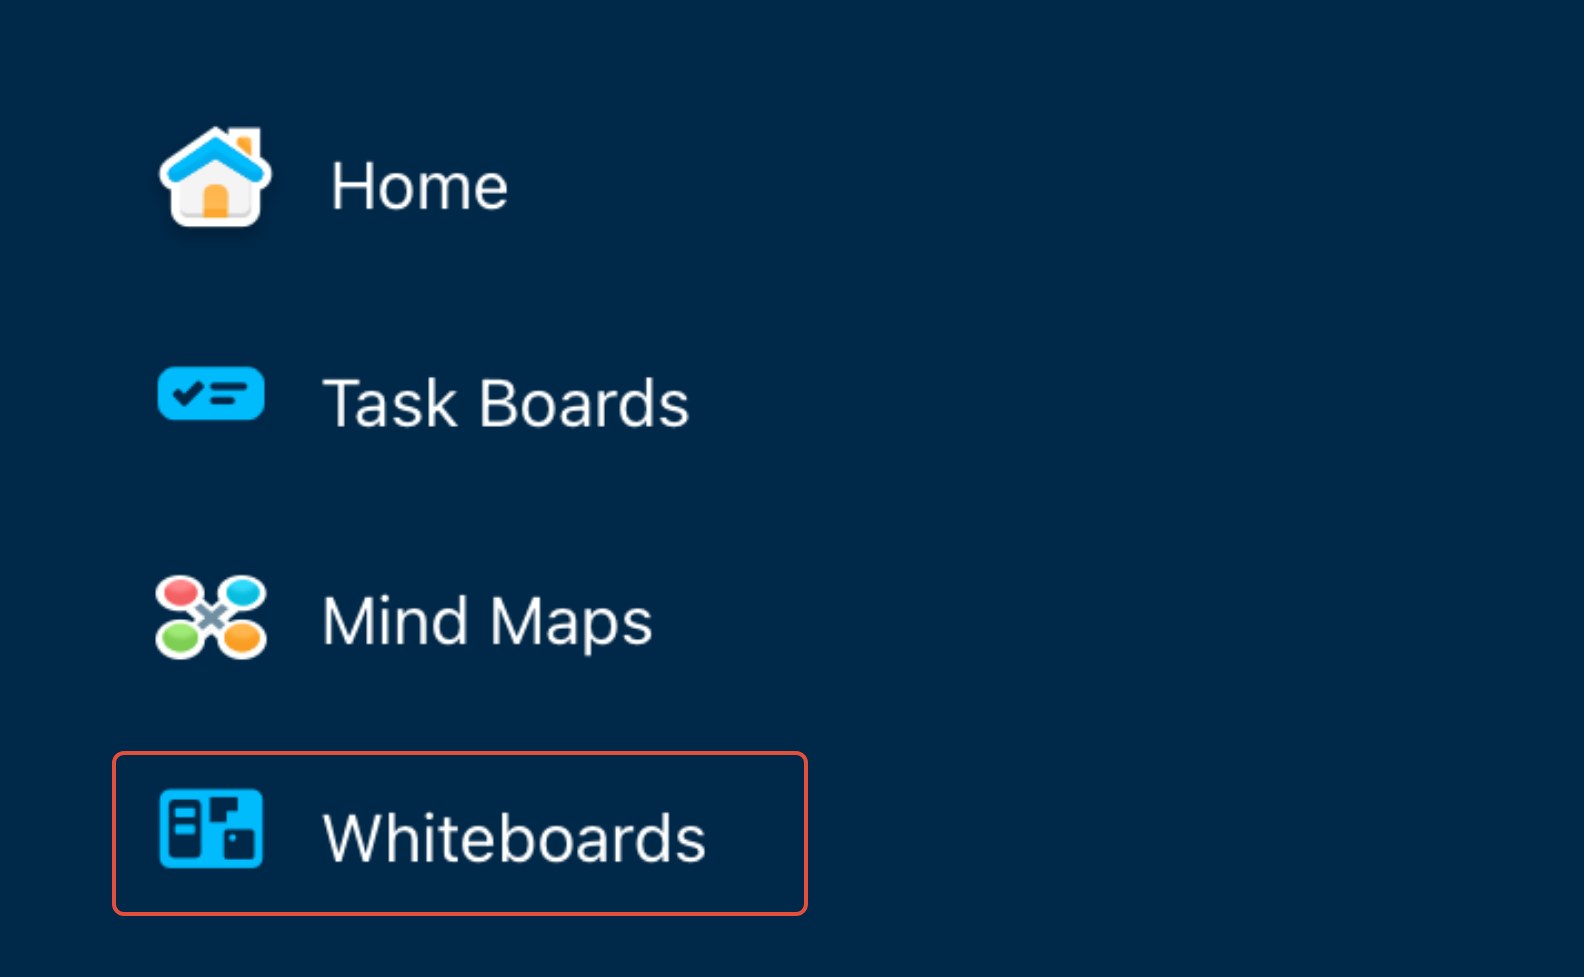 Tap on "Whiteboards".